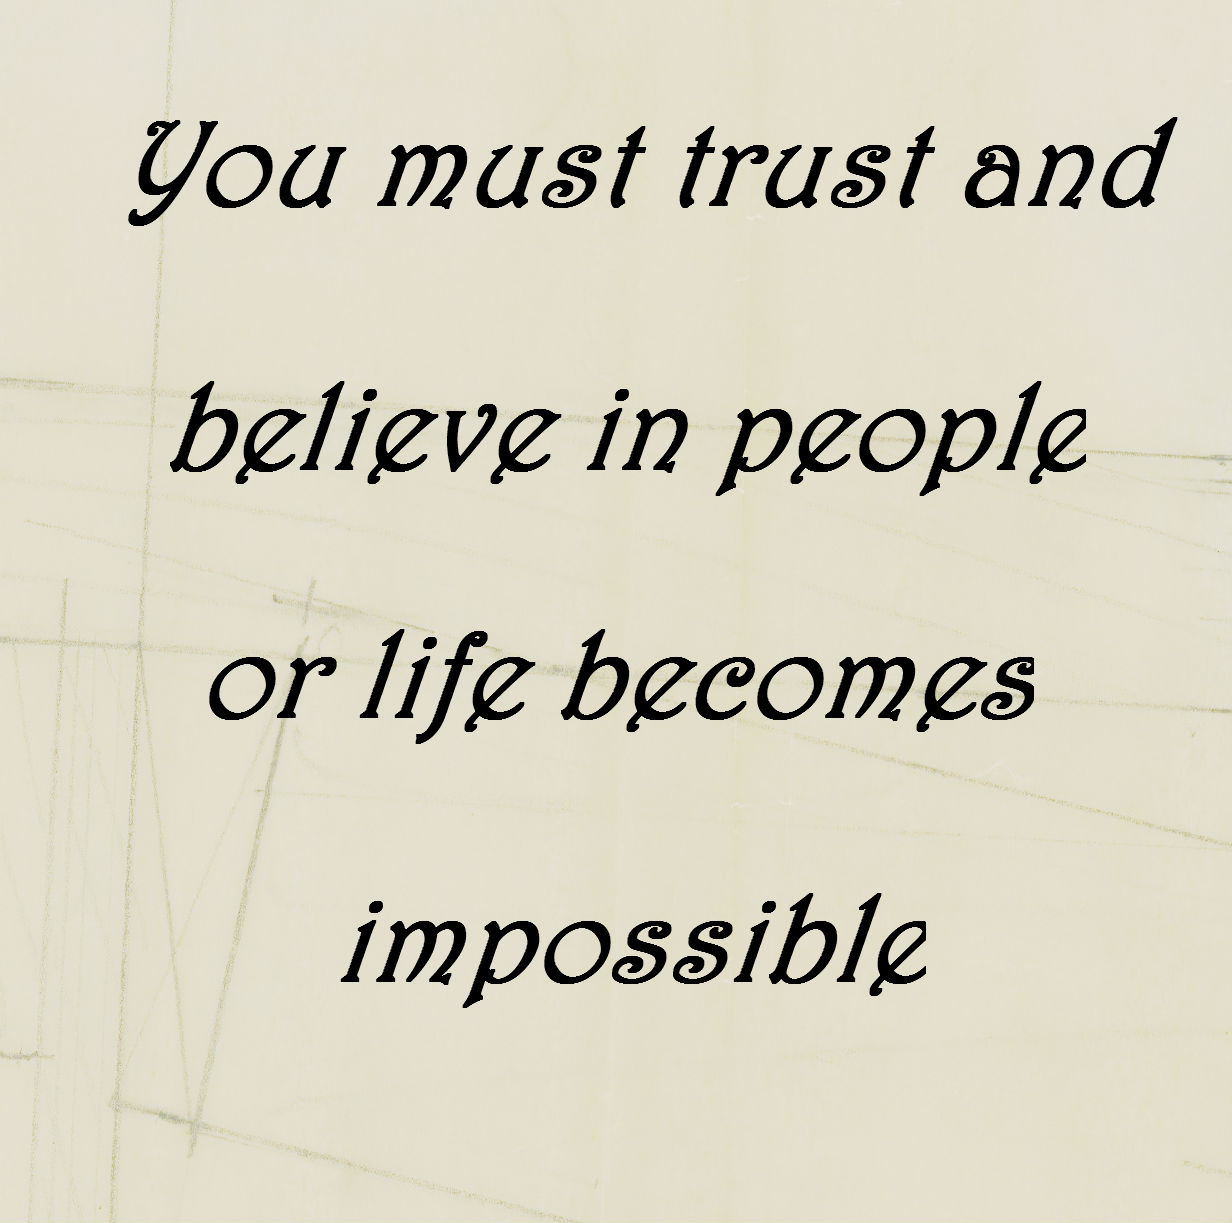 Quotes About Not Trusting People. QuotesGram